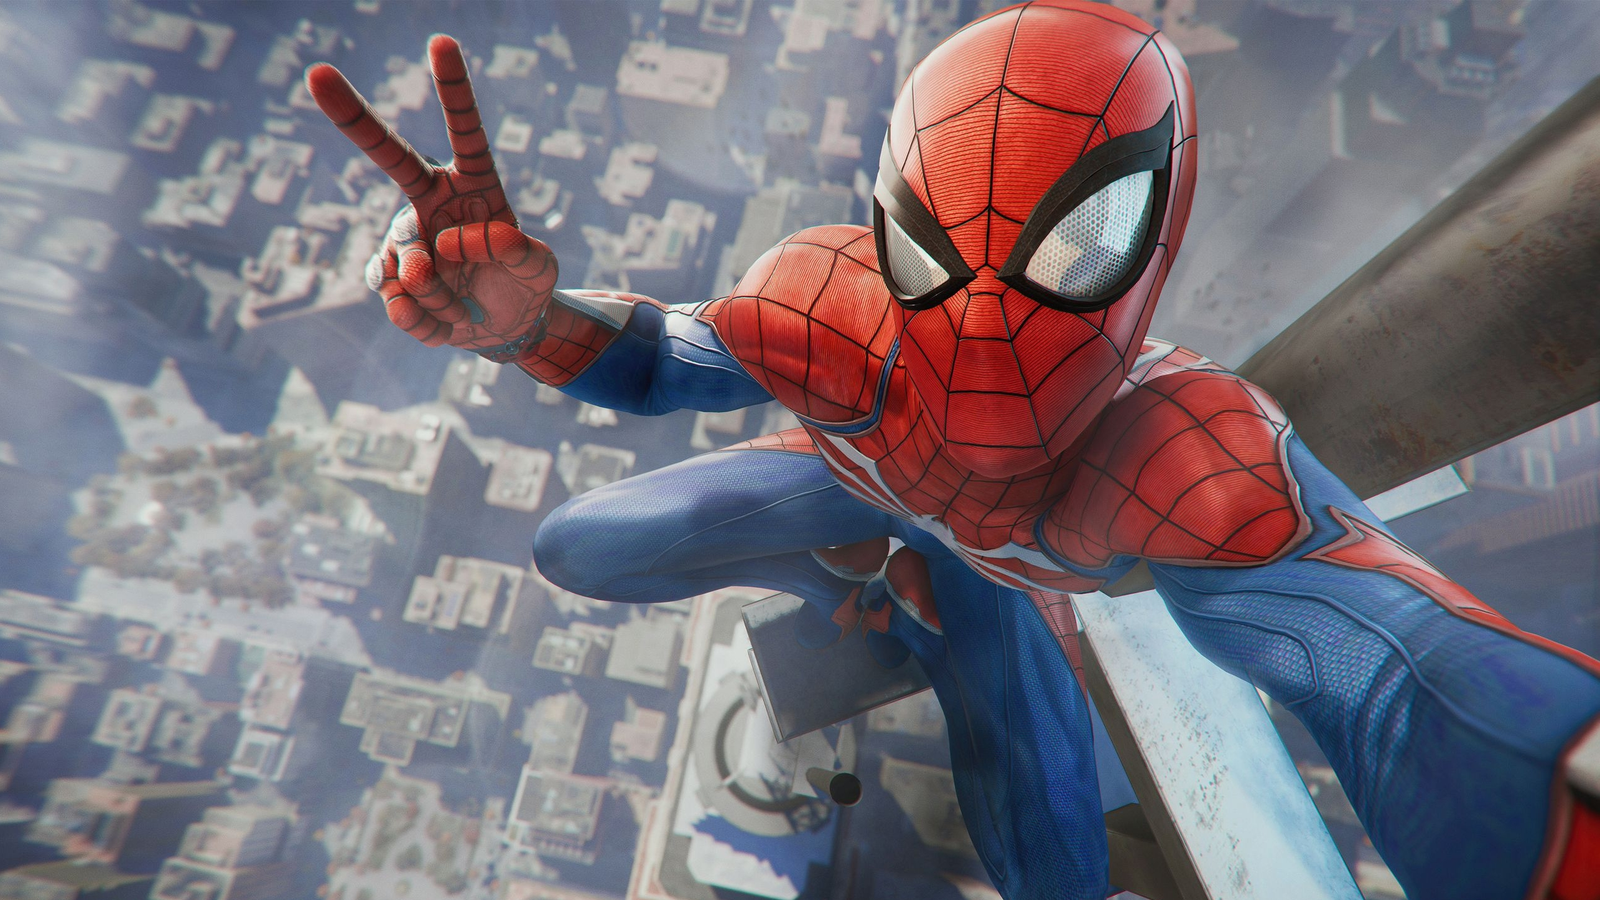 Six Things to do in Marvel's Spider-Man Remastered